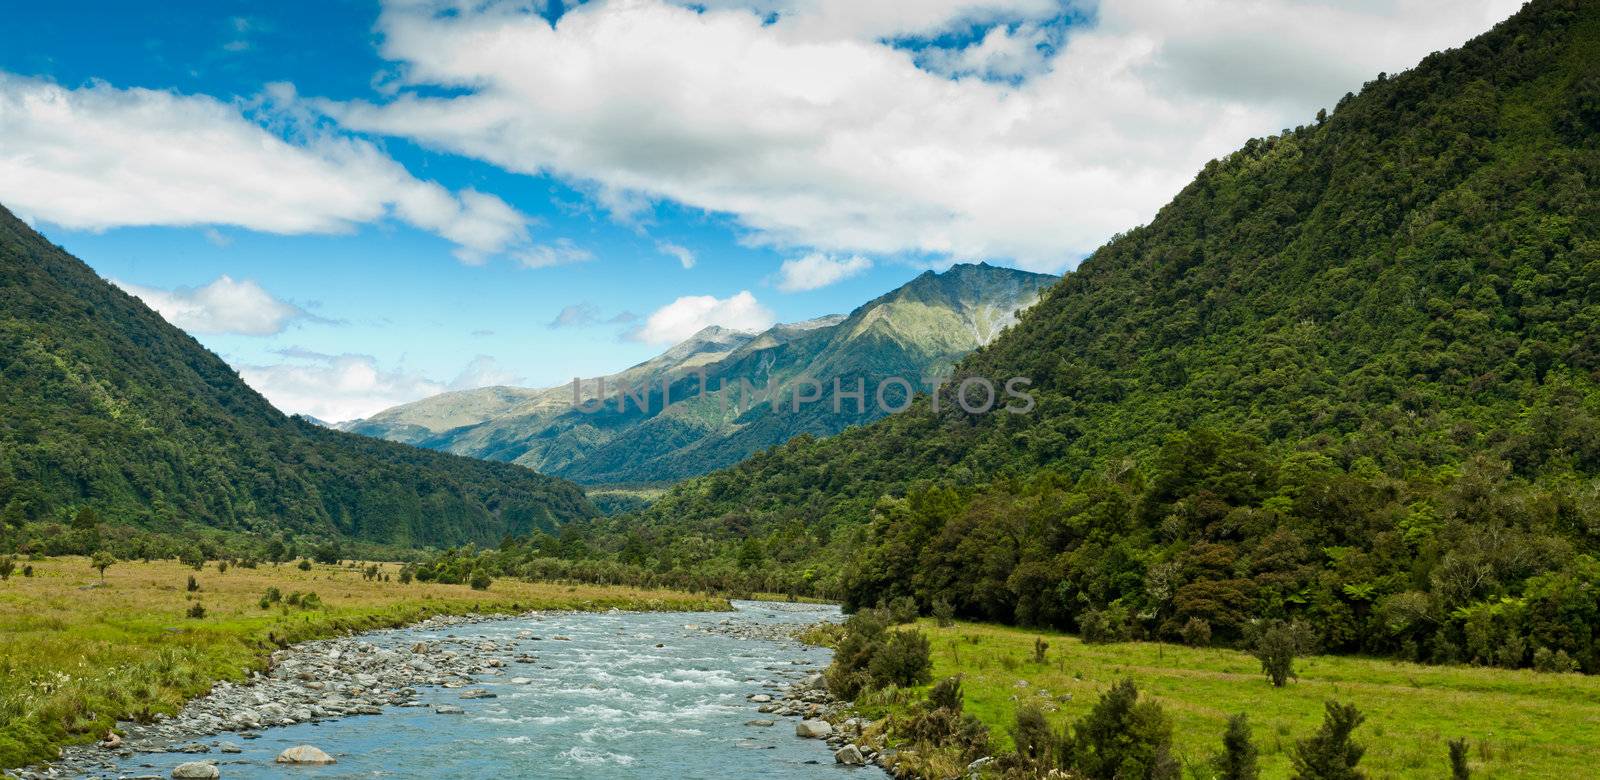 river flowing through a valley with mountain massive in the back ground